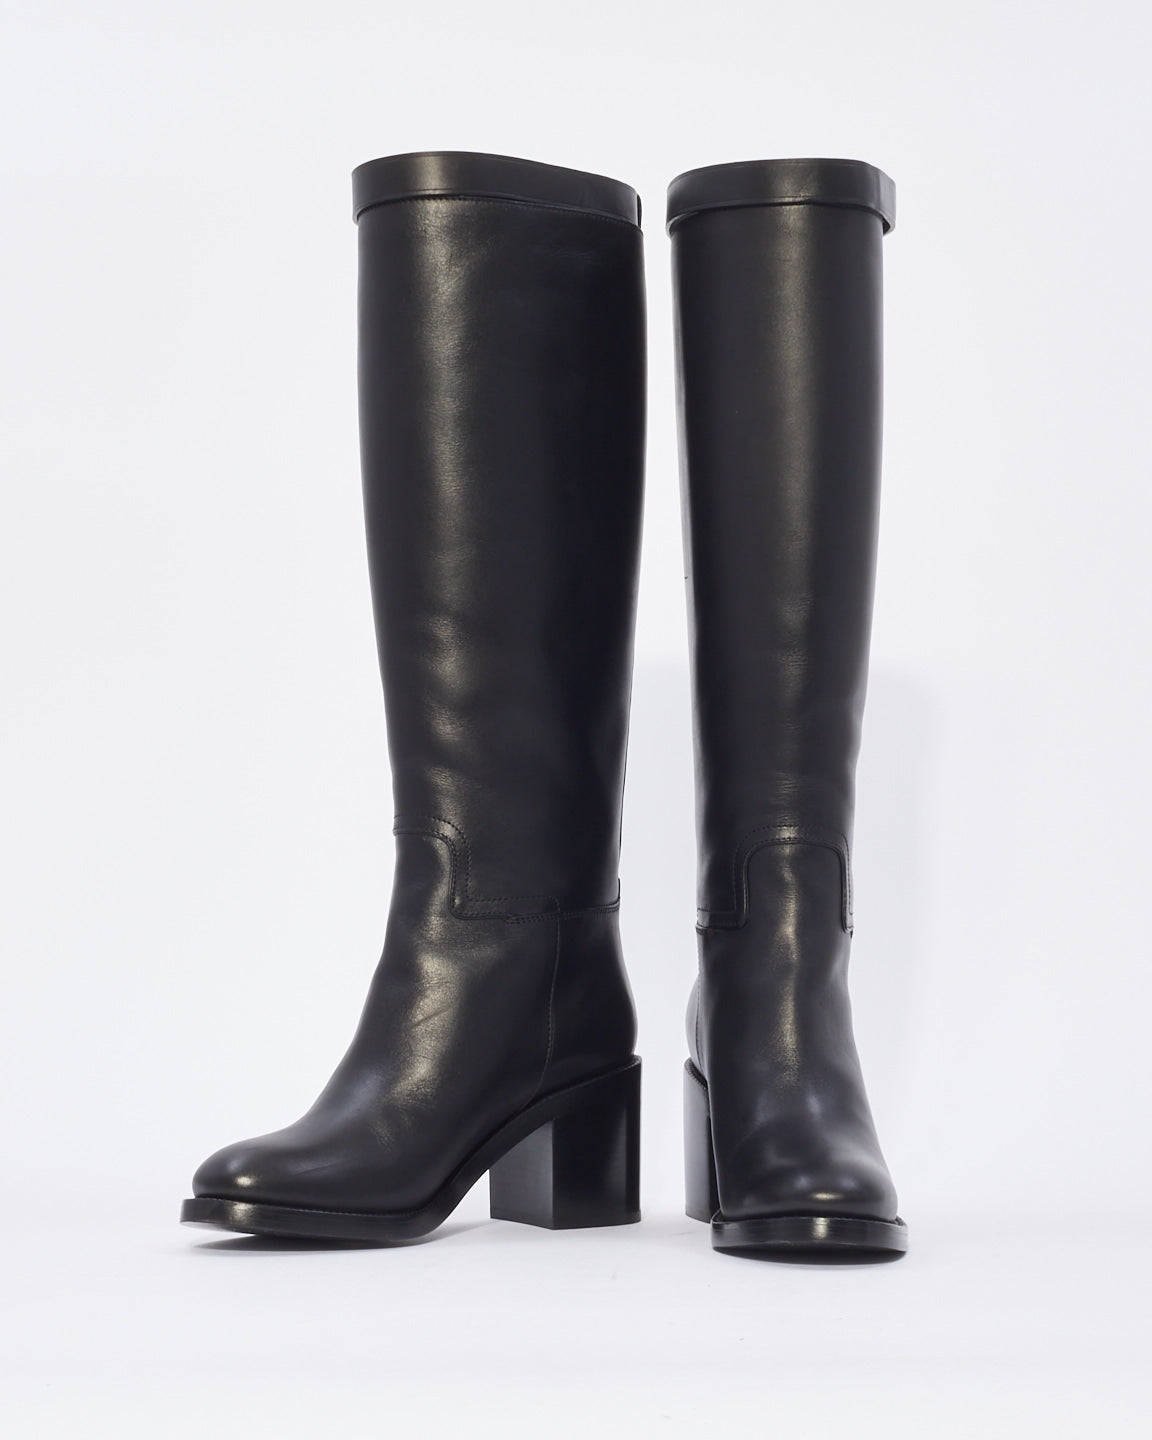 Burberry Black Leather Knee High Boots - 38.5